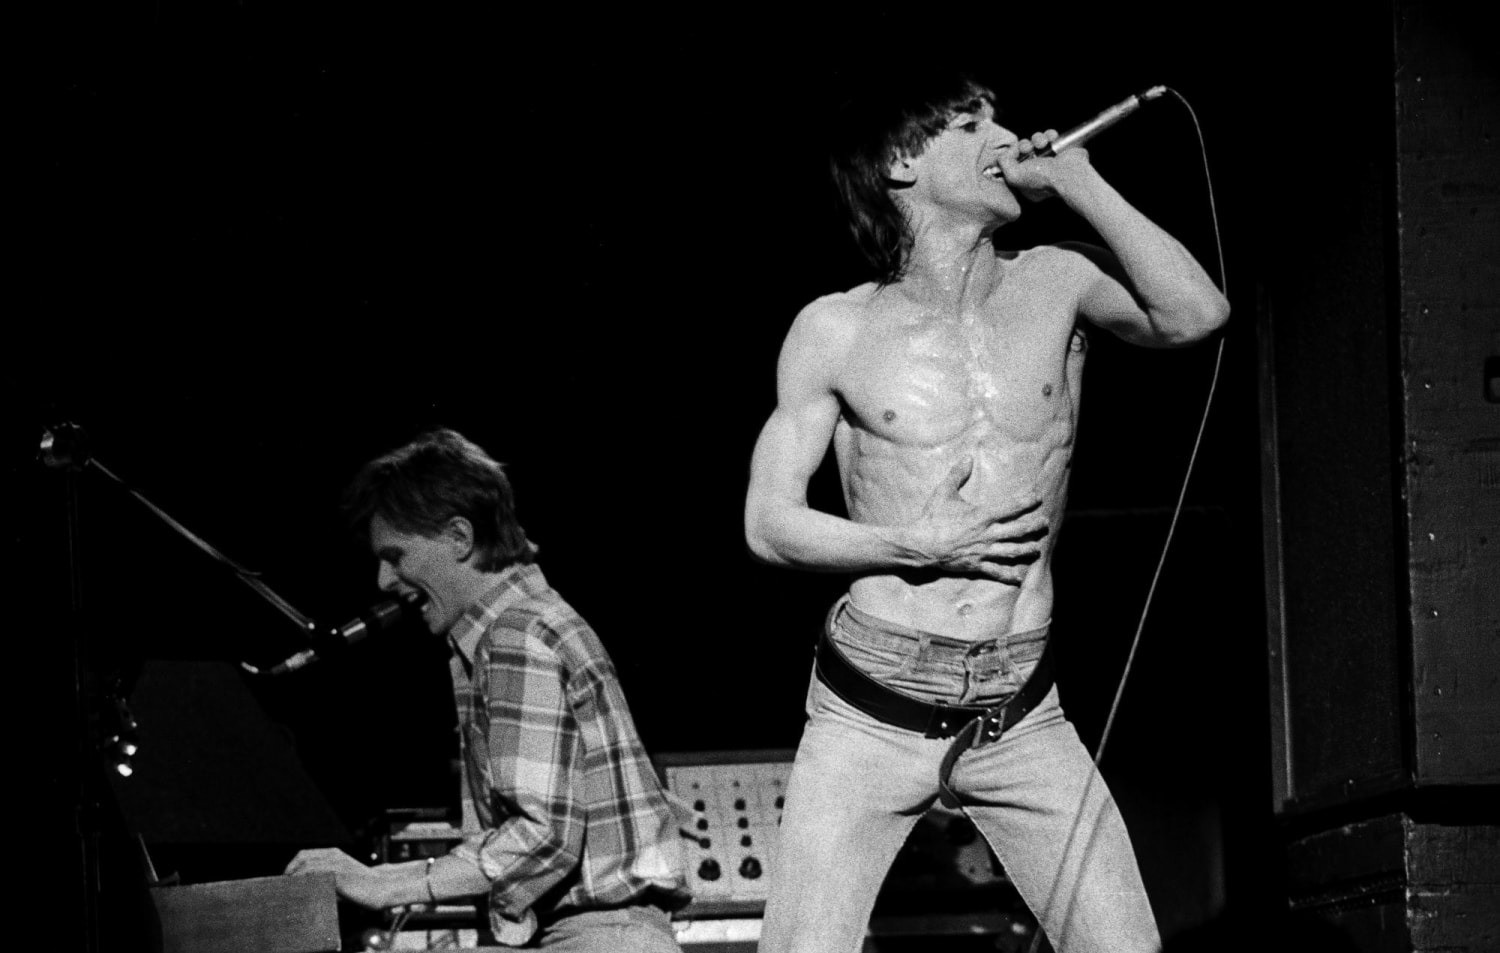 How Iggy Pop and David Bowie's Berlin era inspires punk bands in 2020